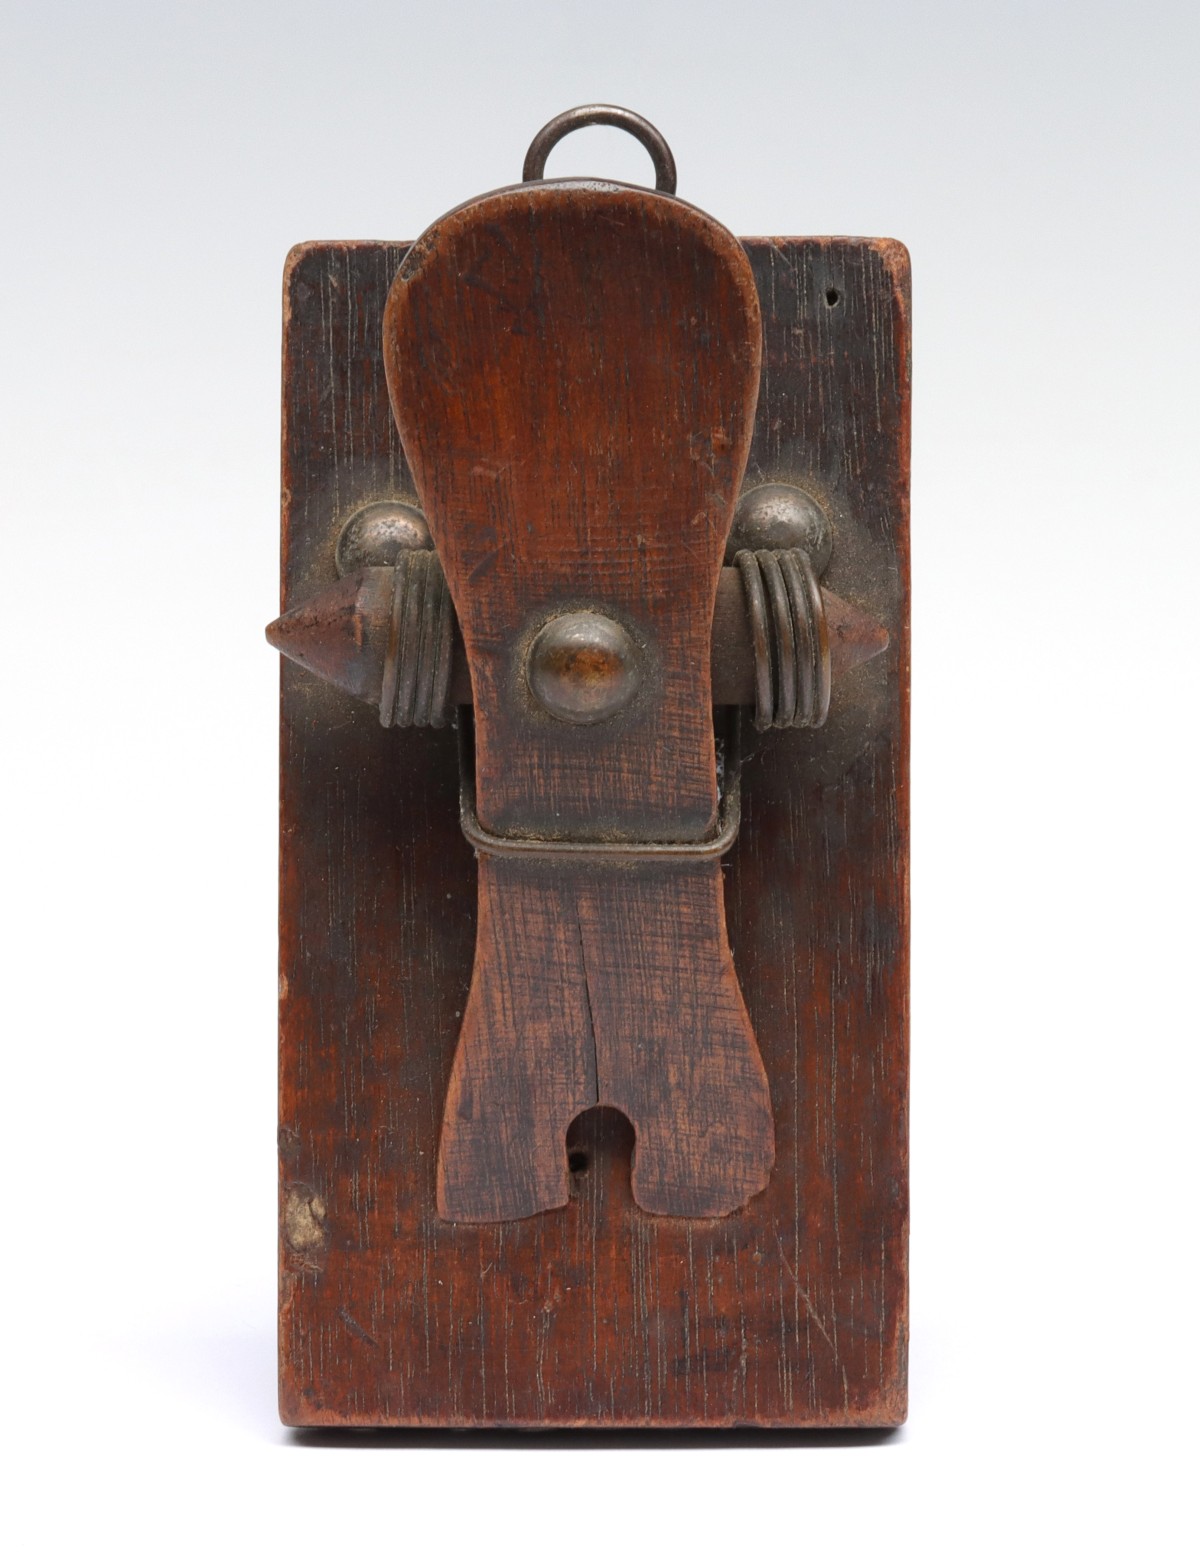 PATENTED WALNUT LETTER OR BILL CLIP DATED 1875